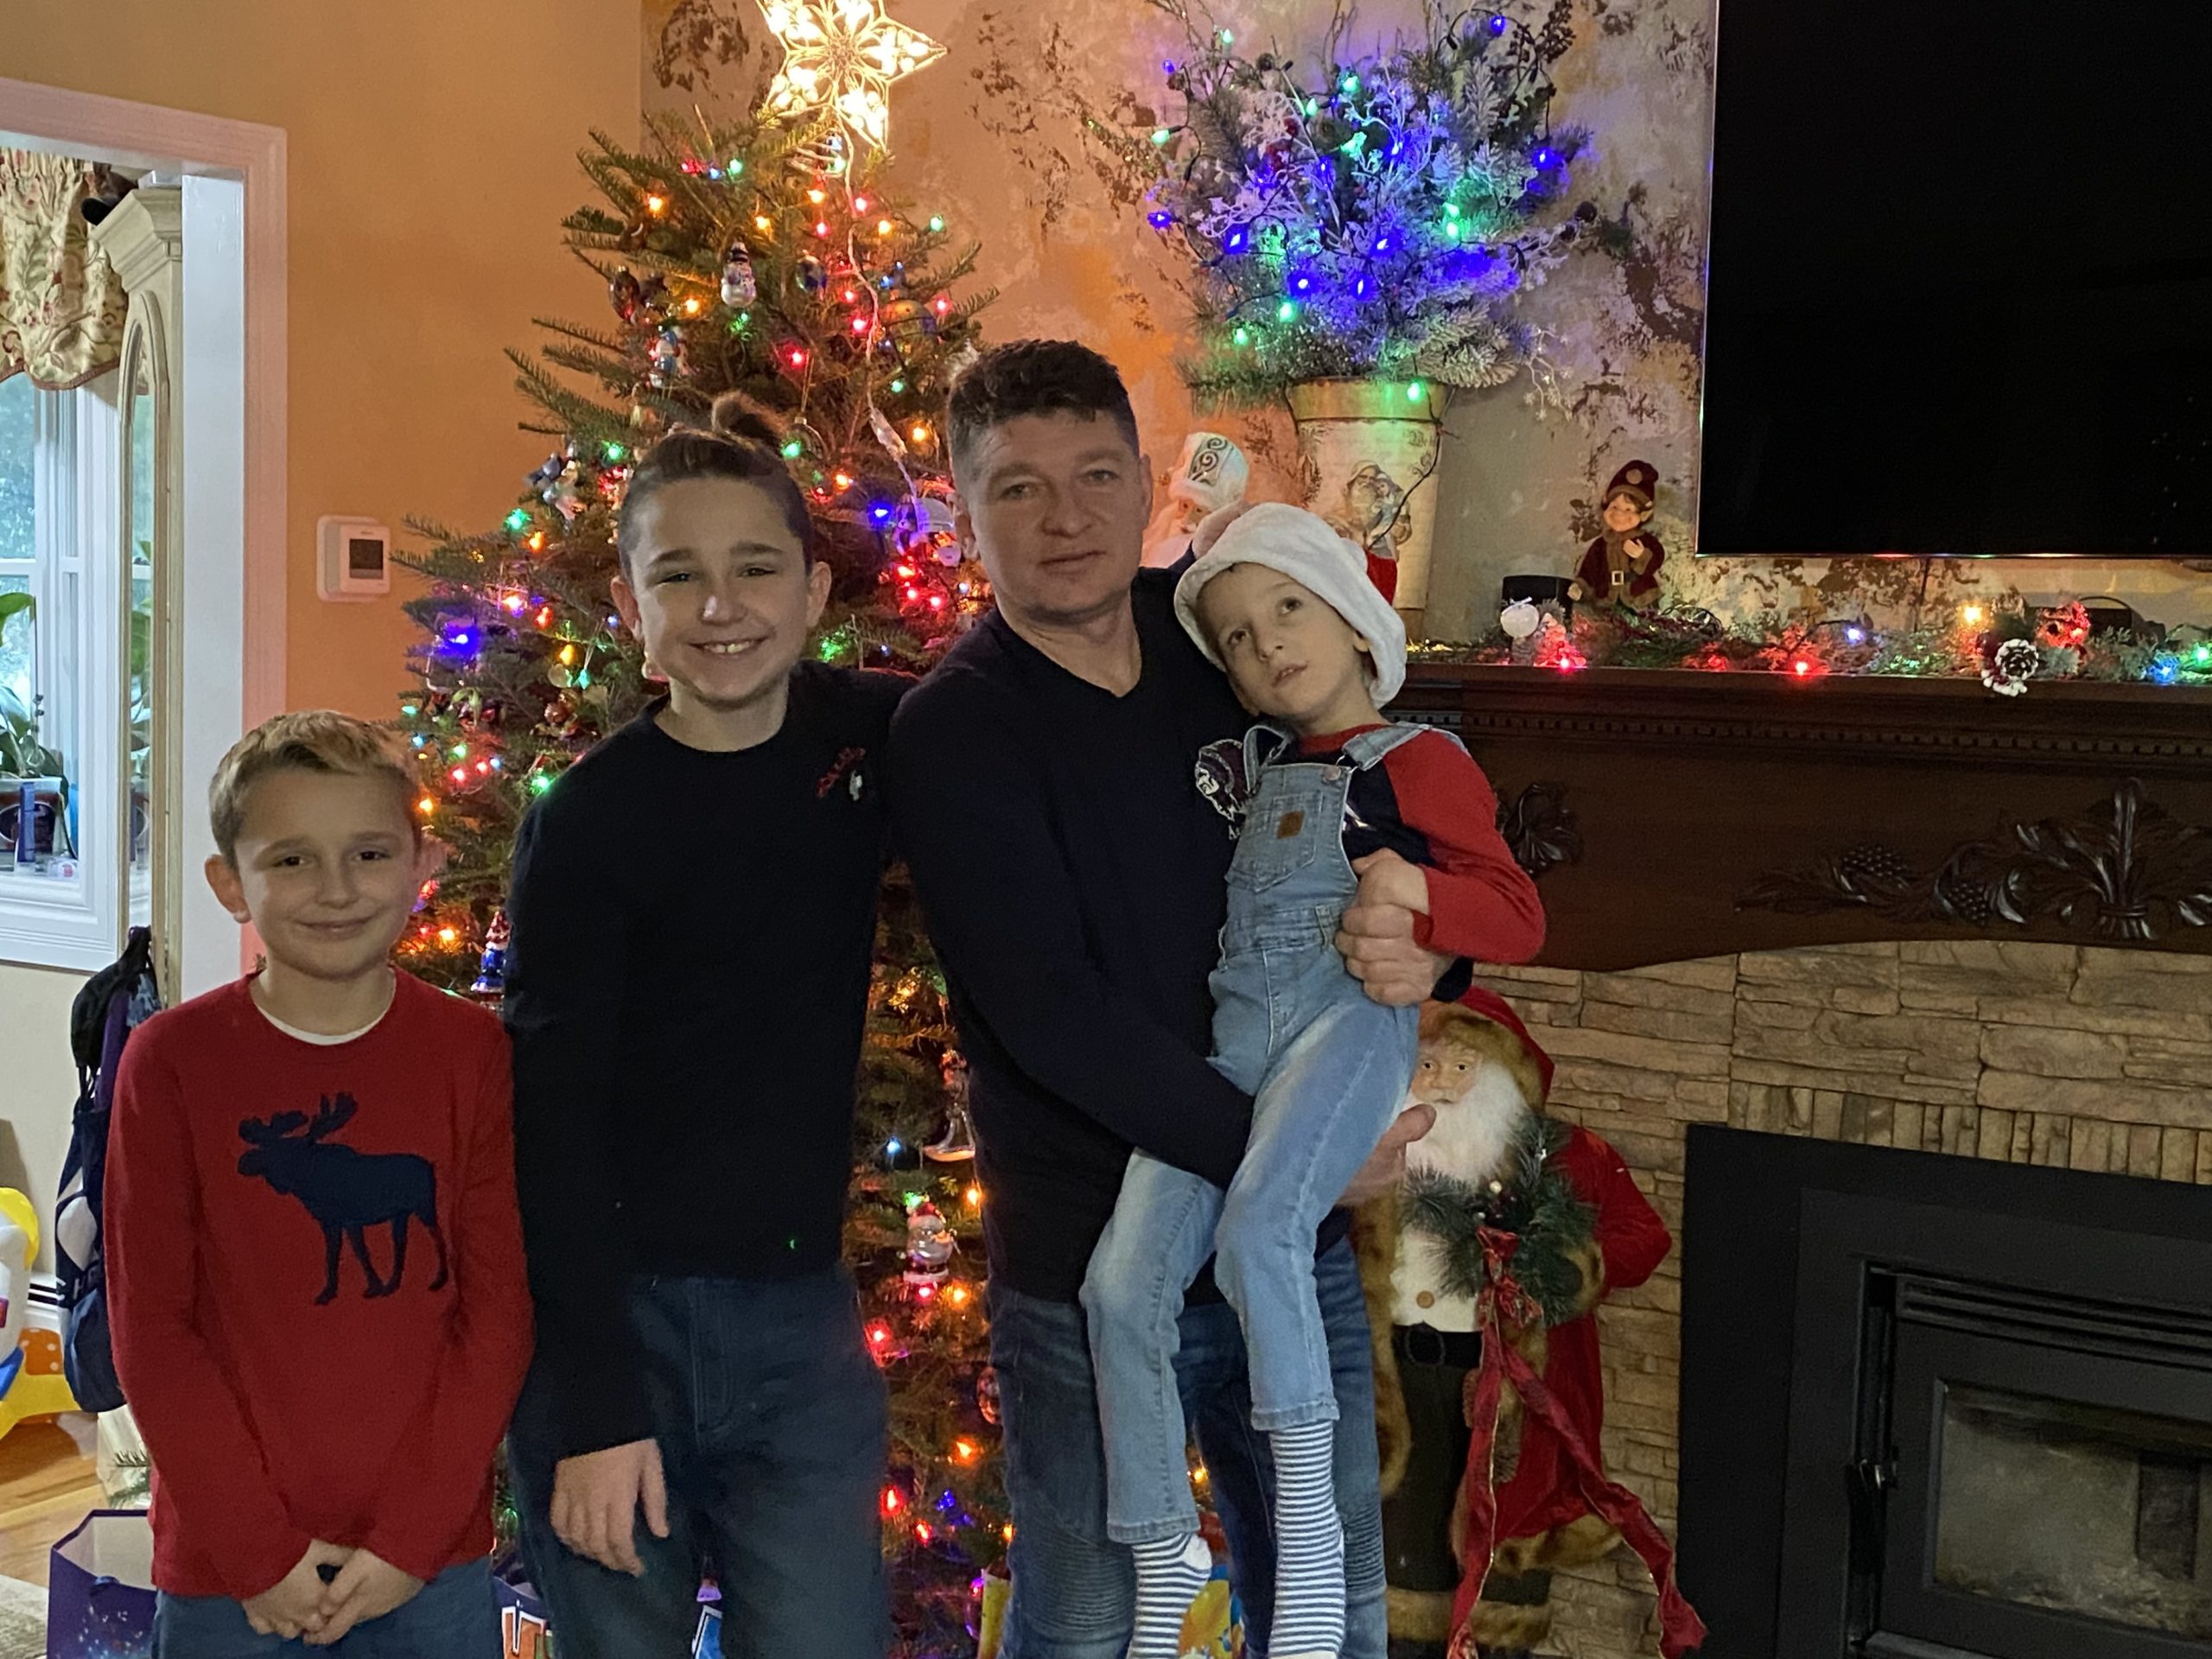 Hampton Bays resident Zbyszek Lutrzykowski died unexpectedly on Saturday at the age of 48. The father of three was a longtime custodian at the Bridgehampton School and also worked at St. Rosalie's Roman Catholic Church in Hampton Bays. He leaves behind his wife, Edyta, and three young sons.